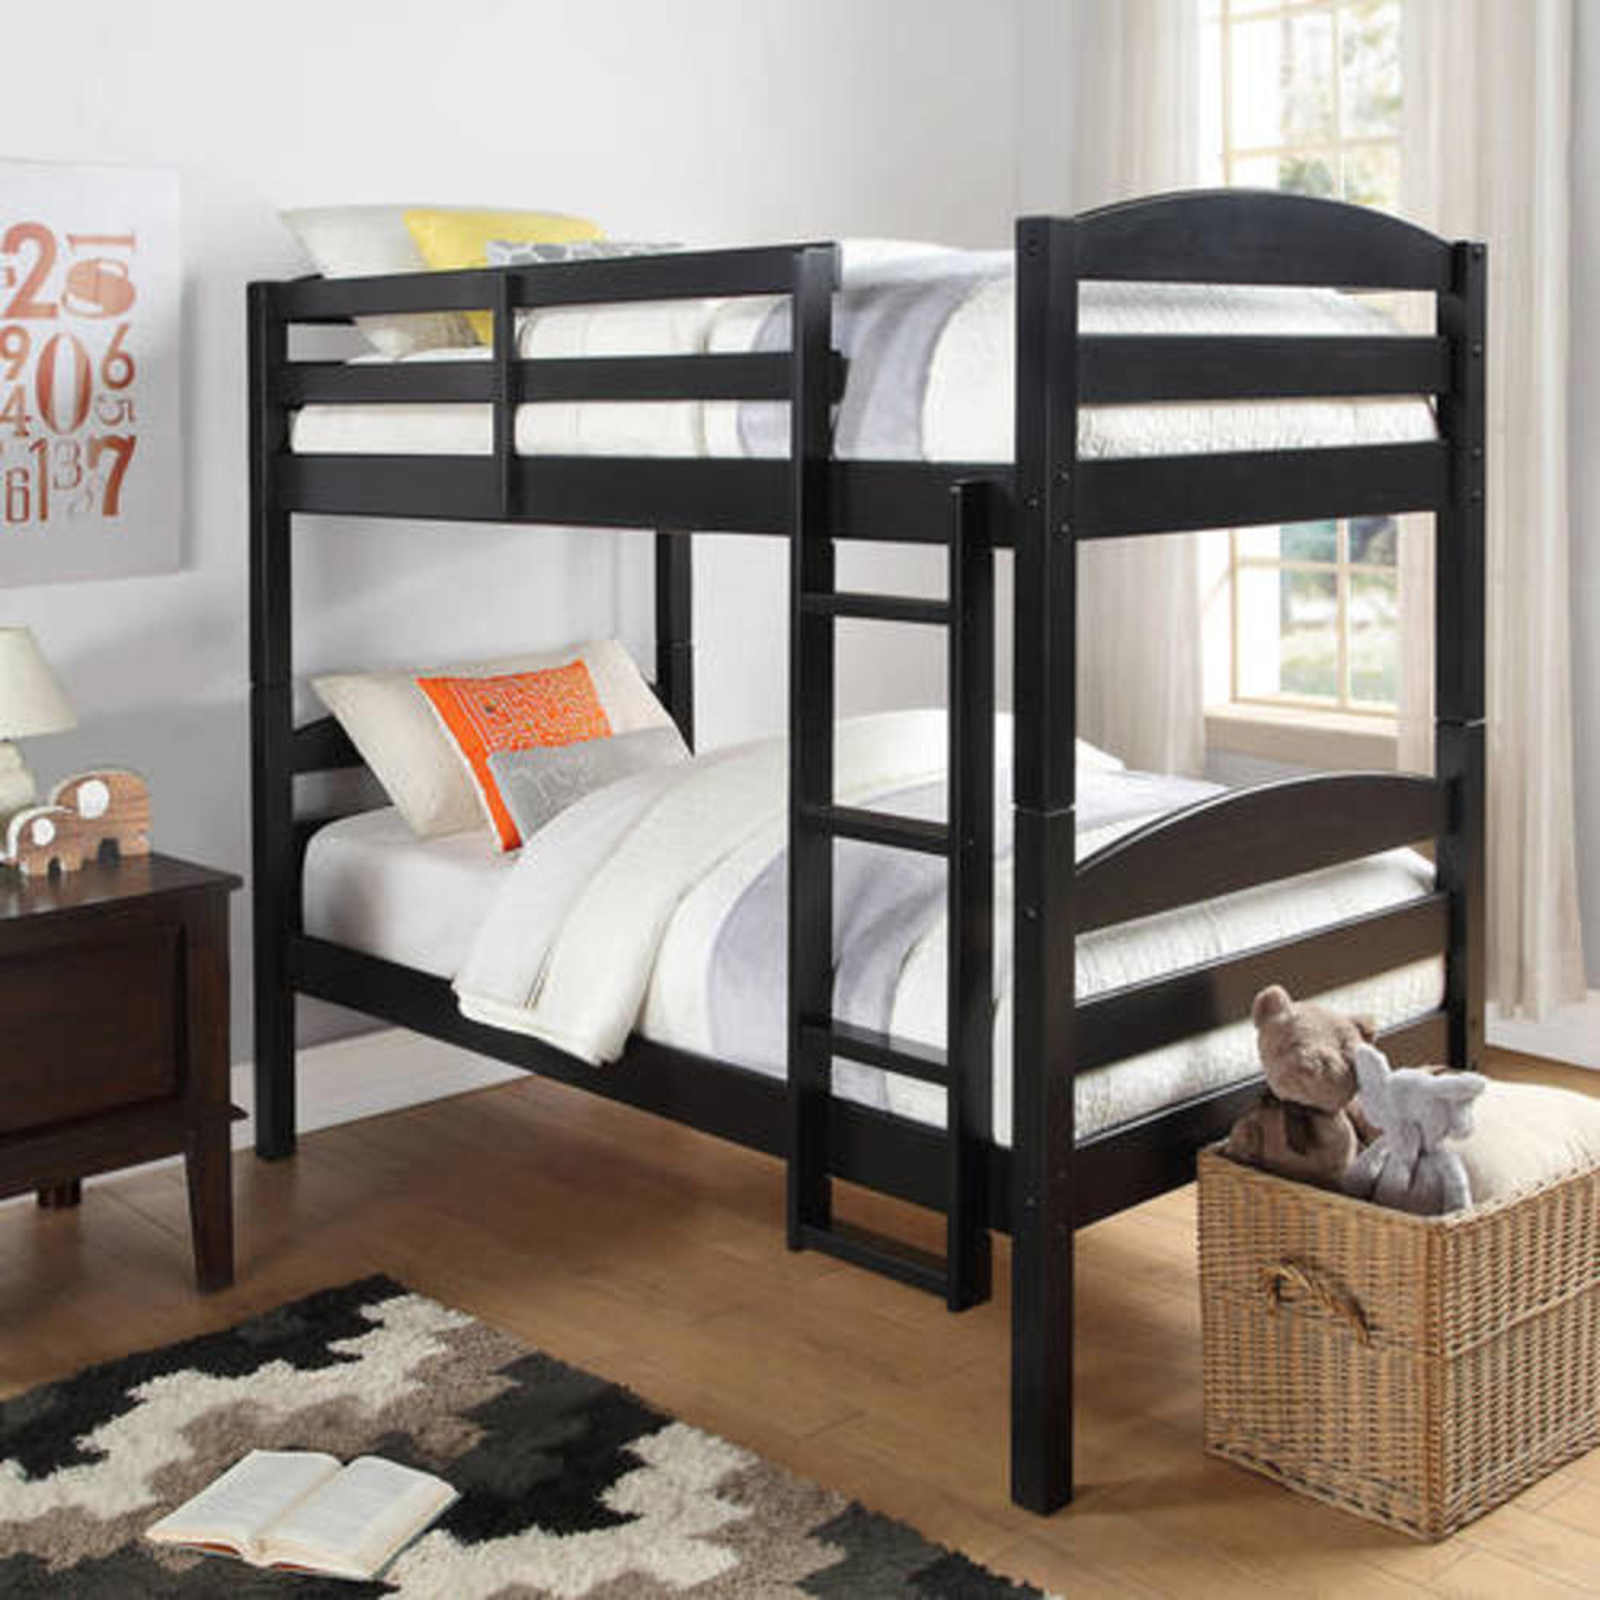 Twin Over Bunk Bed, Cherry Bunk Bed